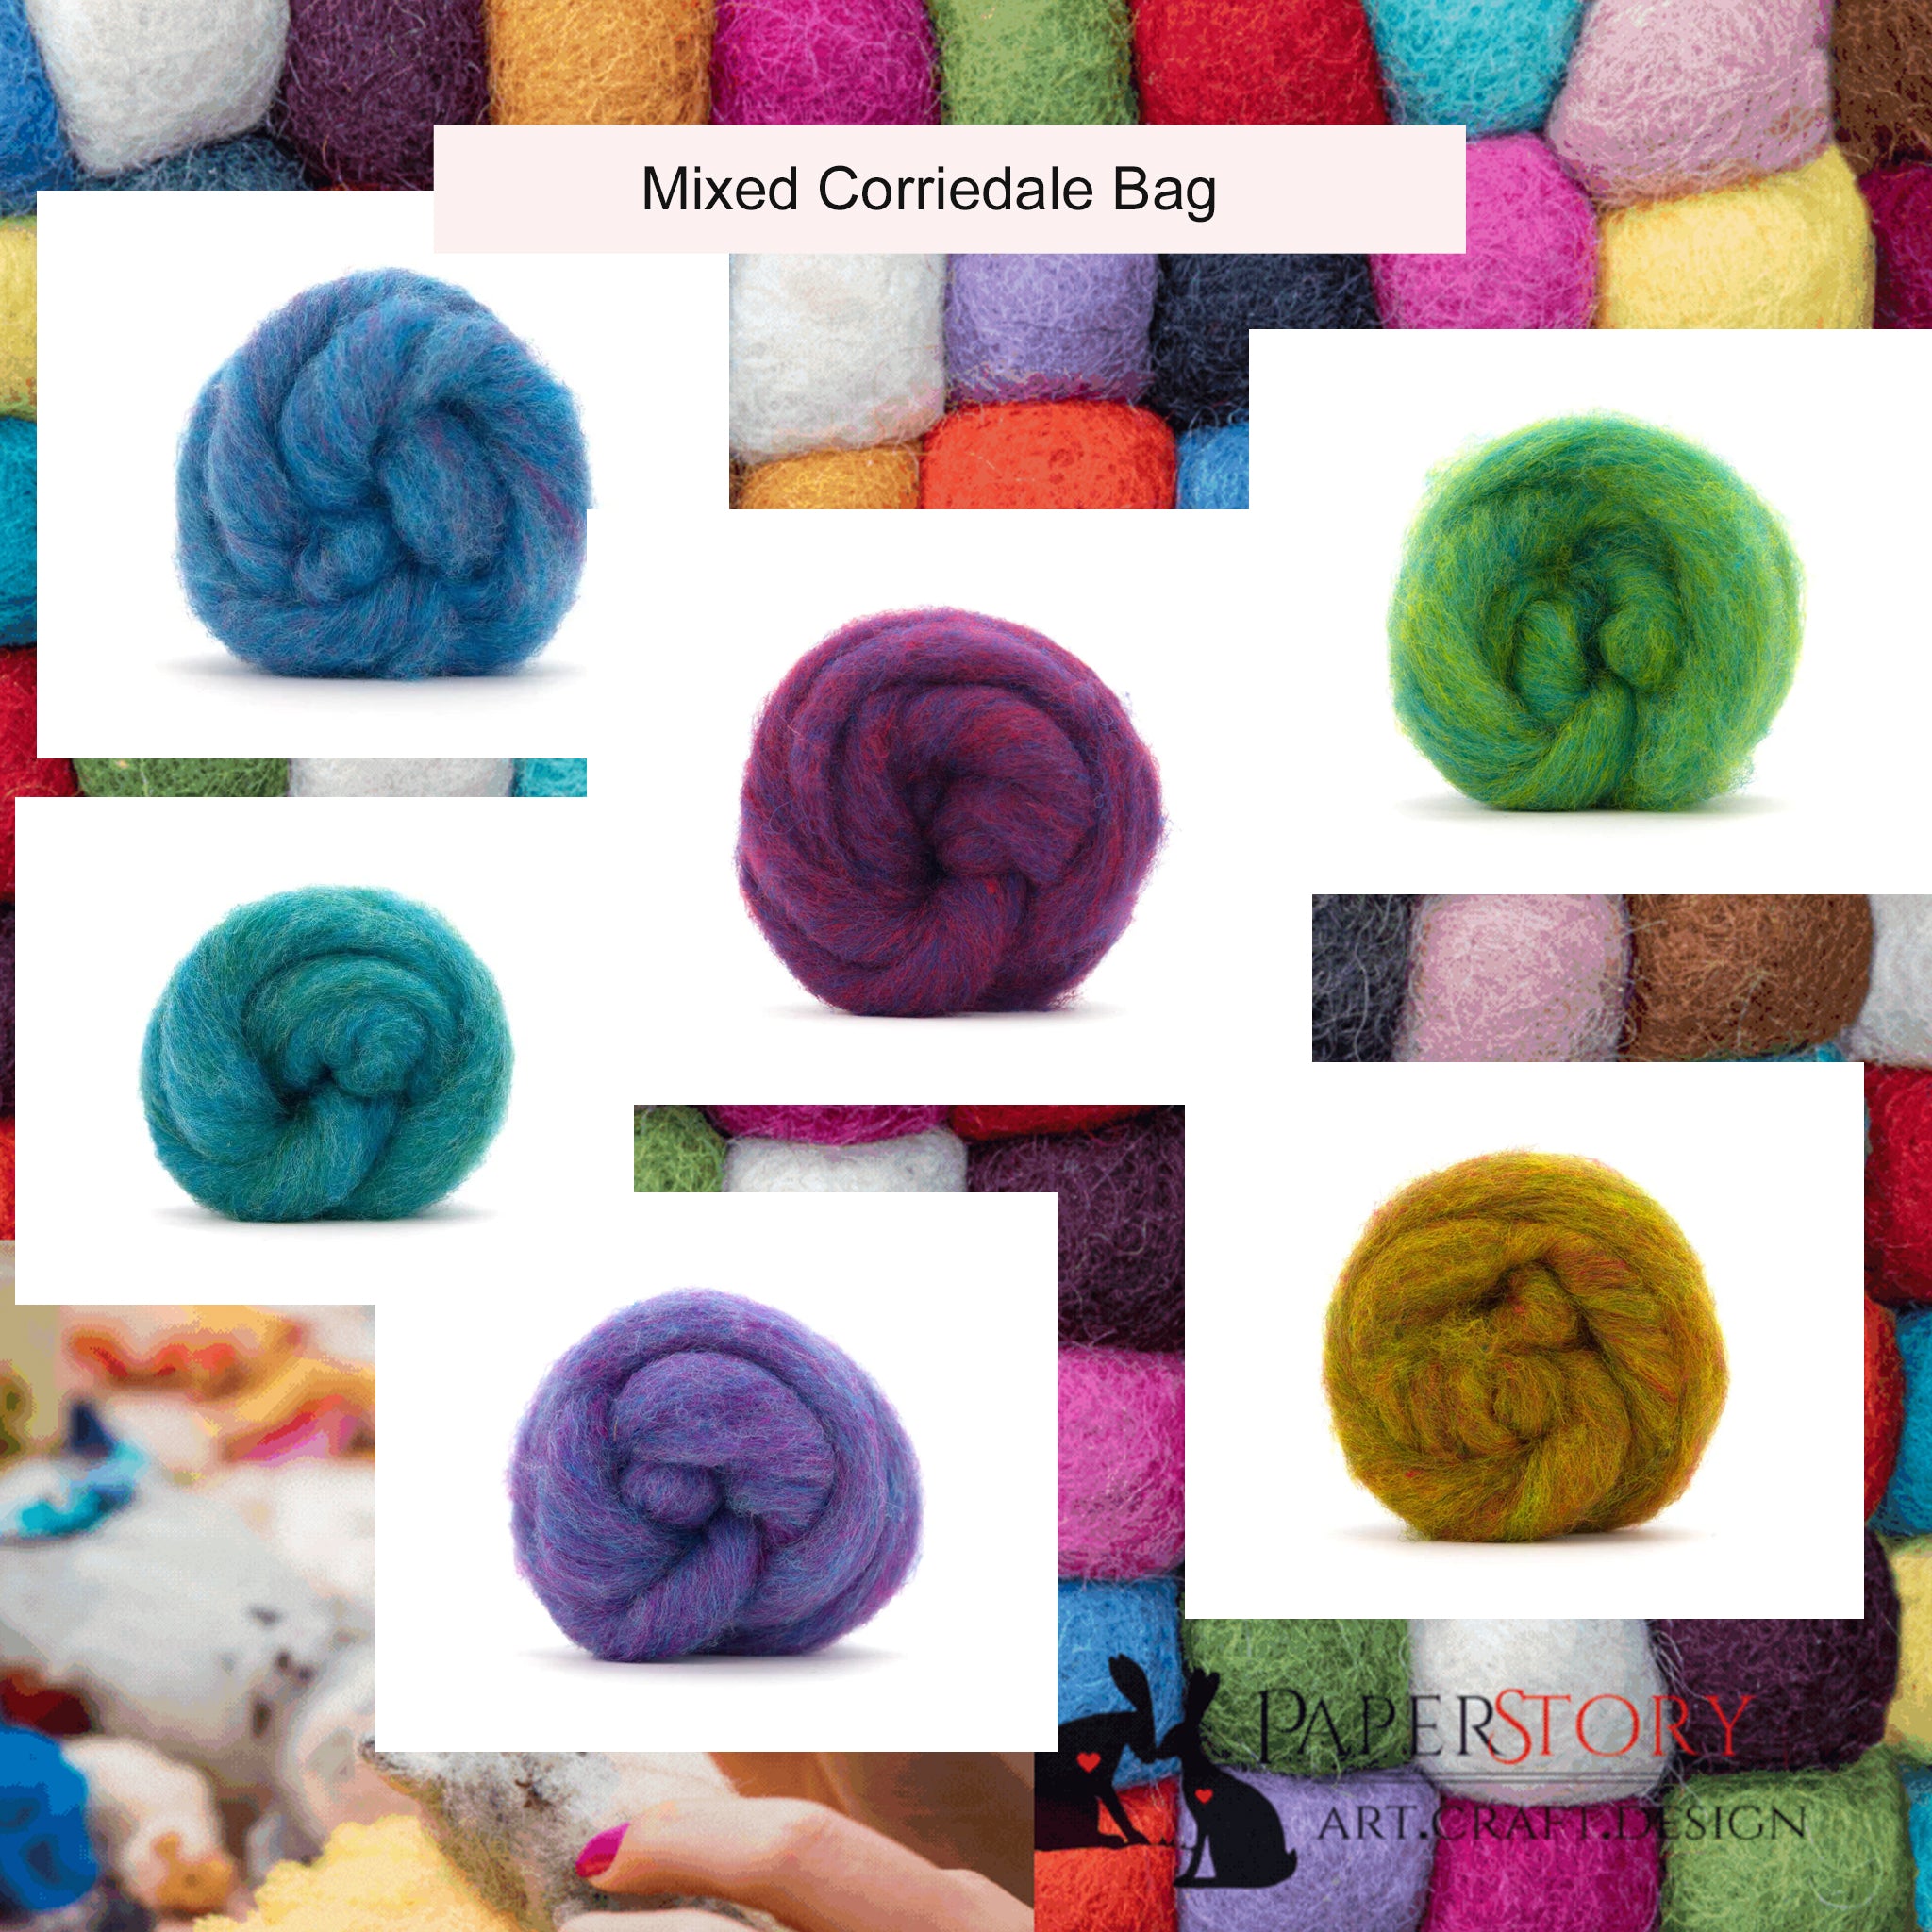 World of Wool Mixed Bag of Carded Corriedale TUTTI FRUTTI